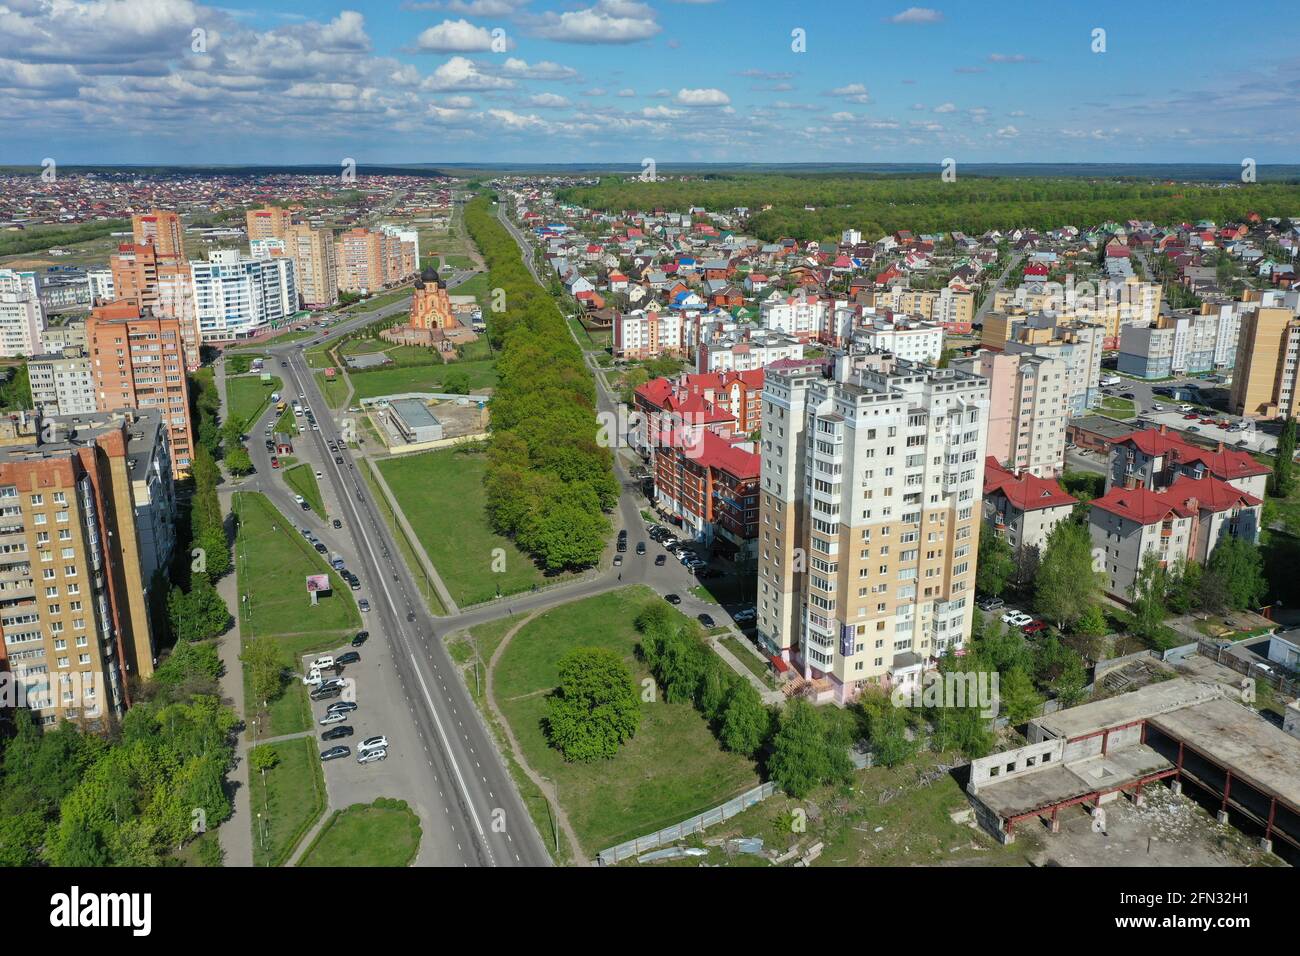 STARIY OSKOL, RUSSIA - MAY 12, 2021: Aerial view of the cityscapes of a Russian provincial town Stock Photo